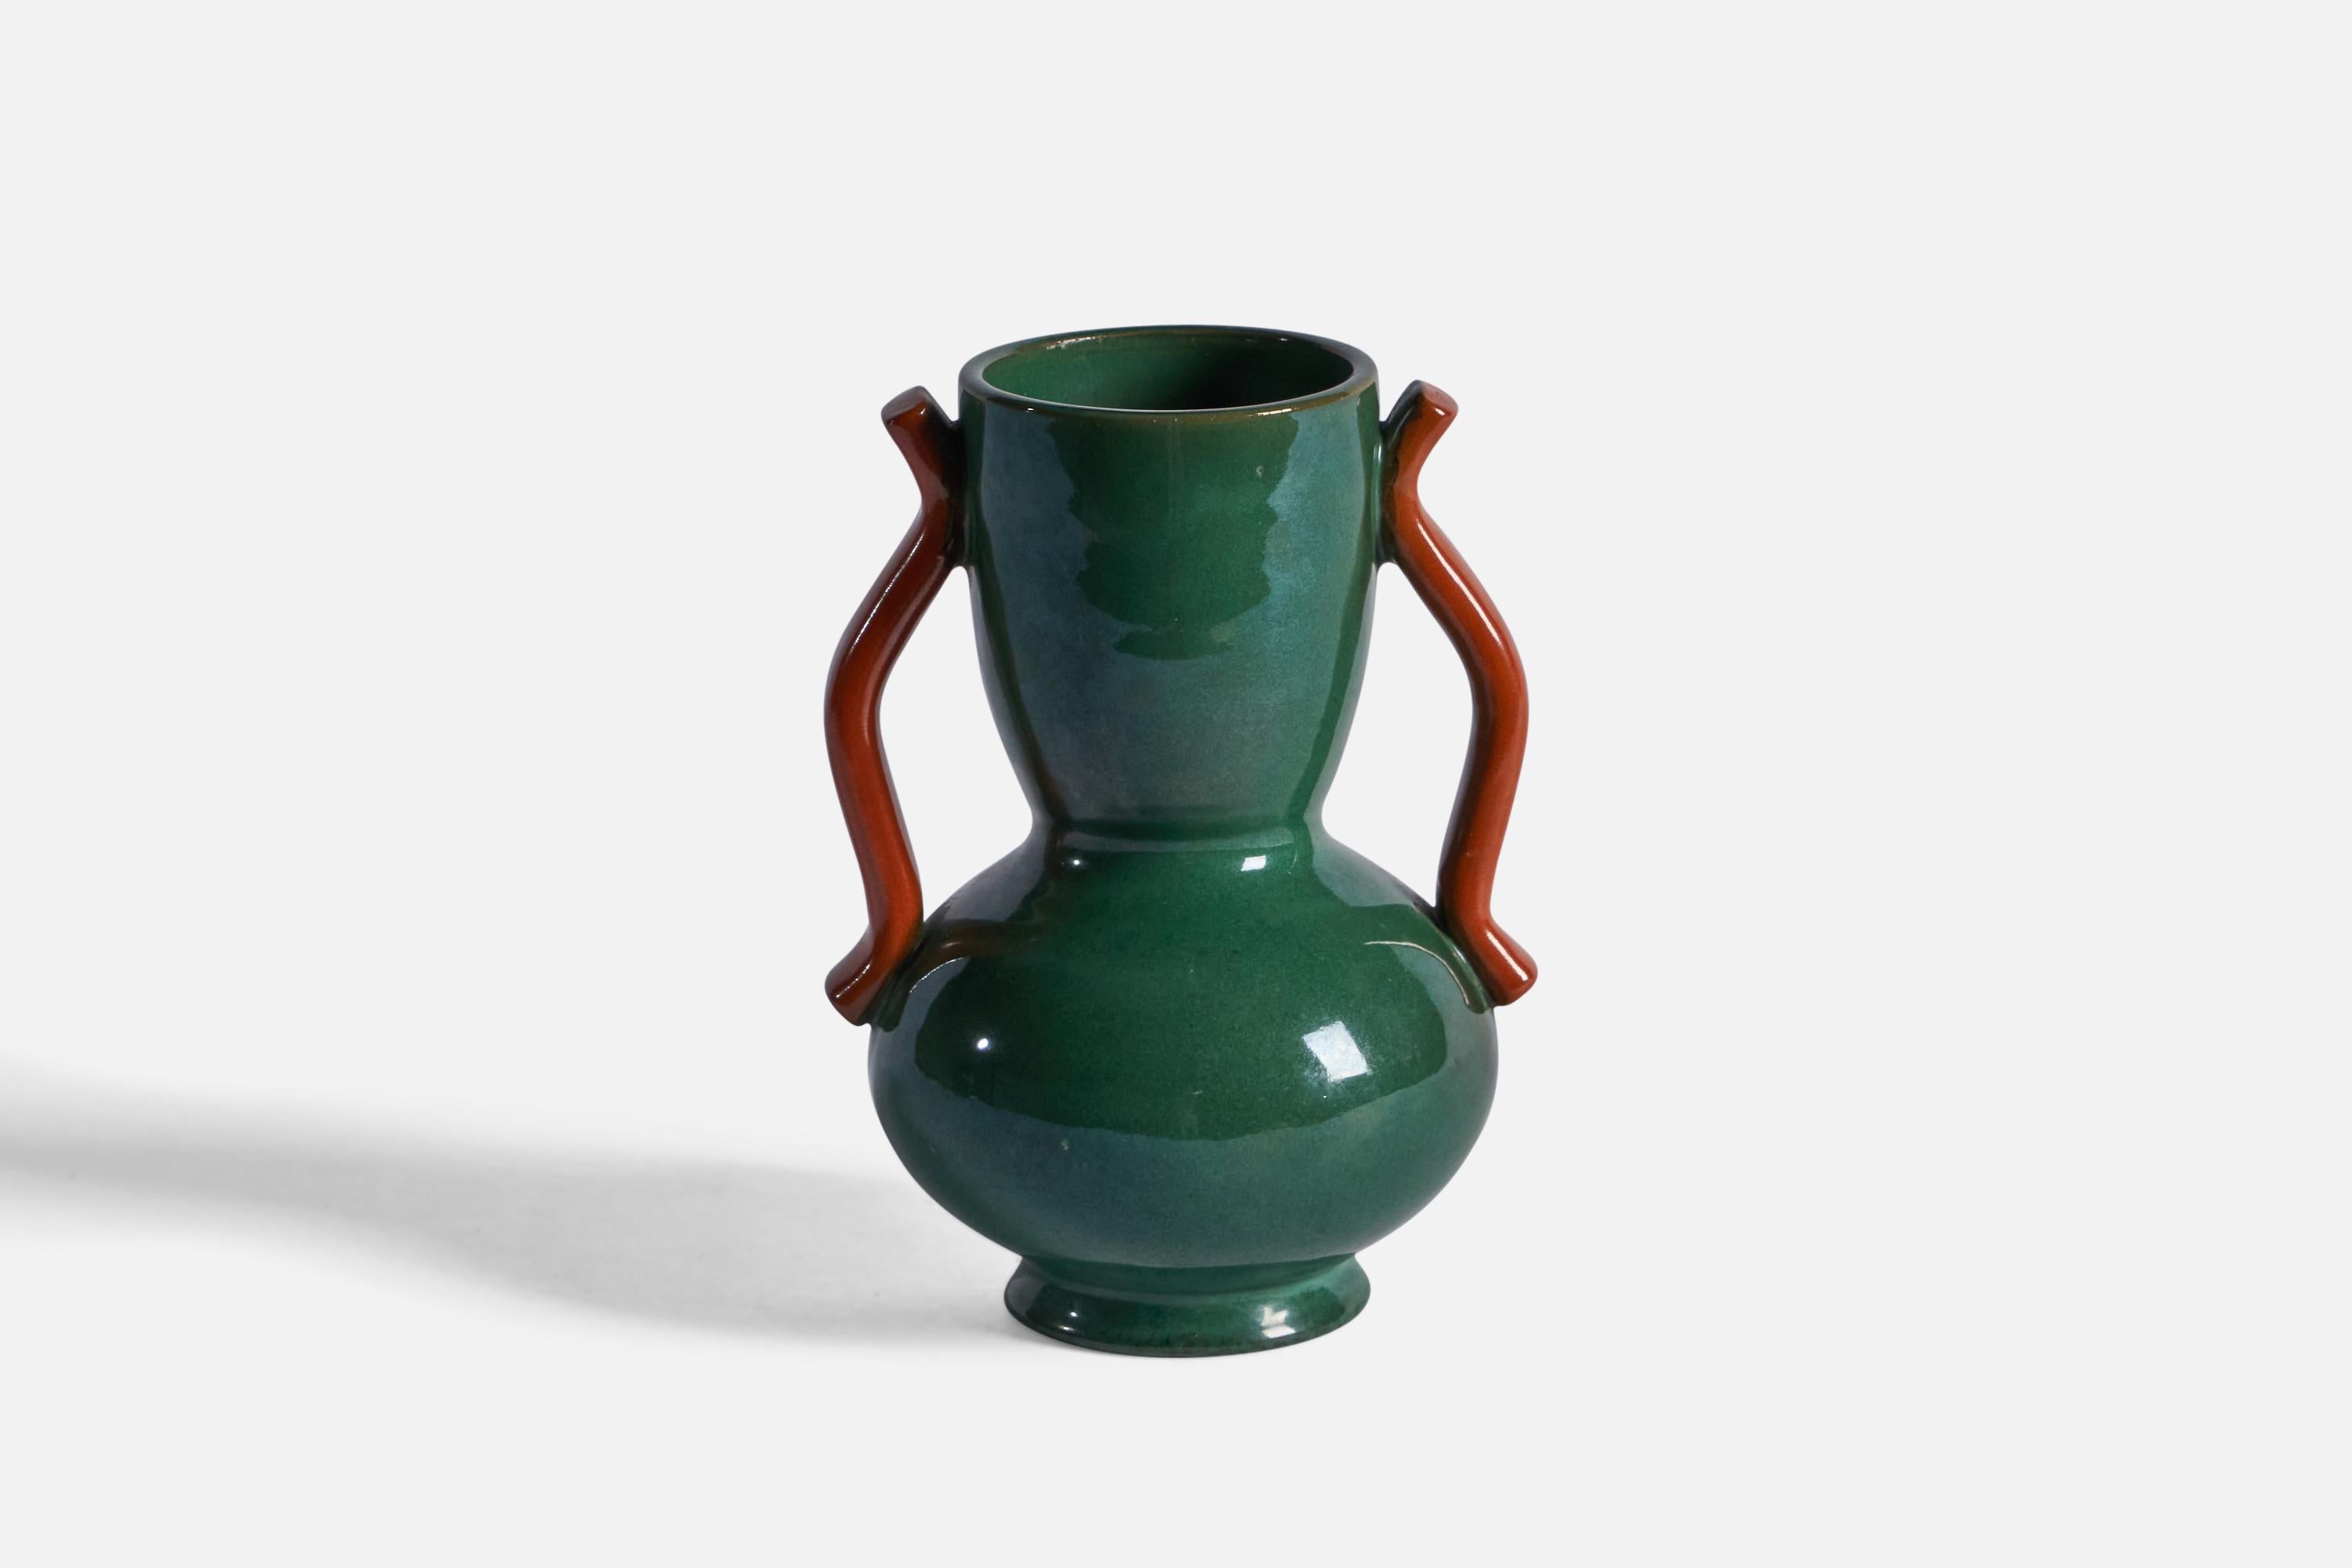 A green and orange-glazed earthenware vase, designed by Anna Lisa Thomson and produced by Upsala Ekeby, Sweden, c. 1940s.